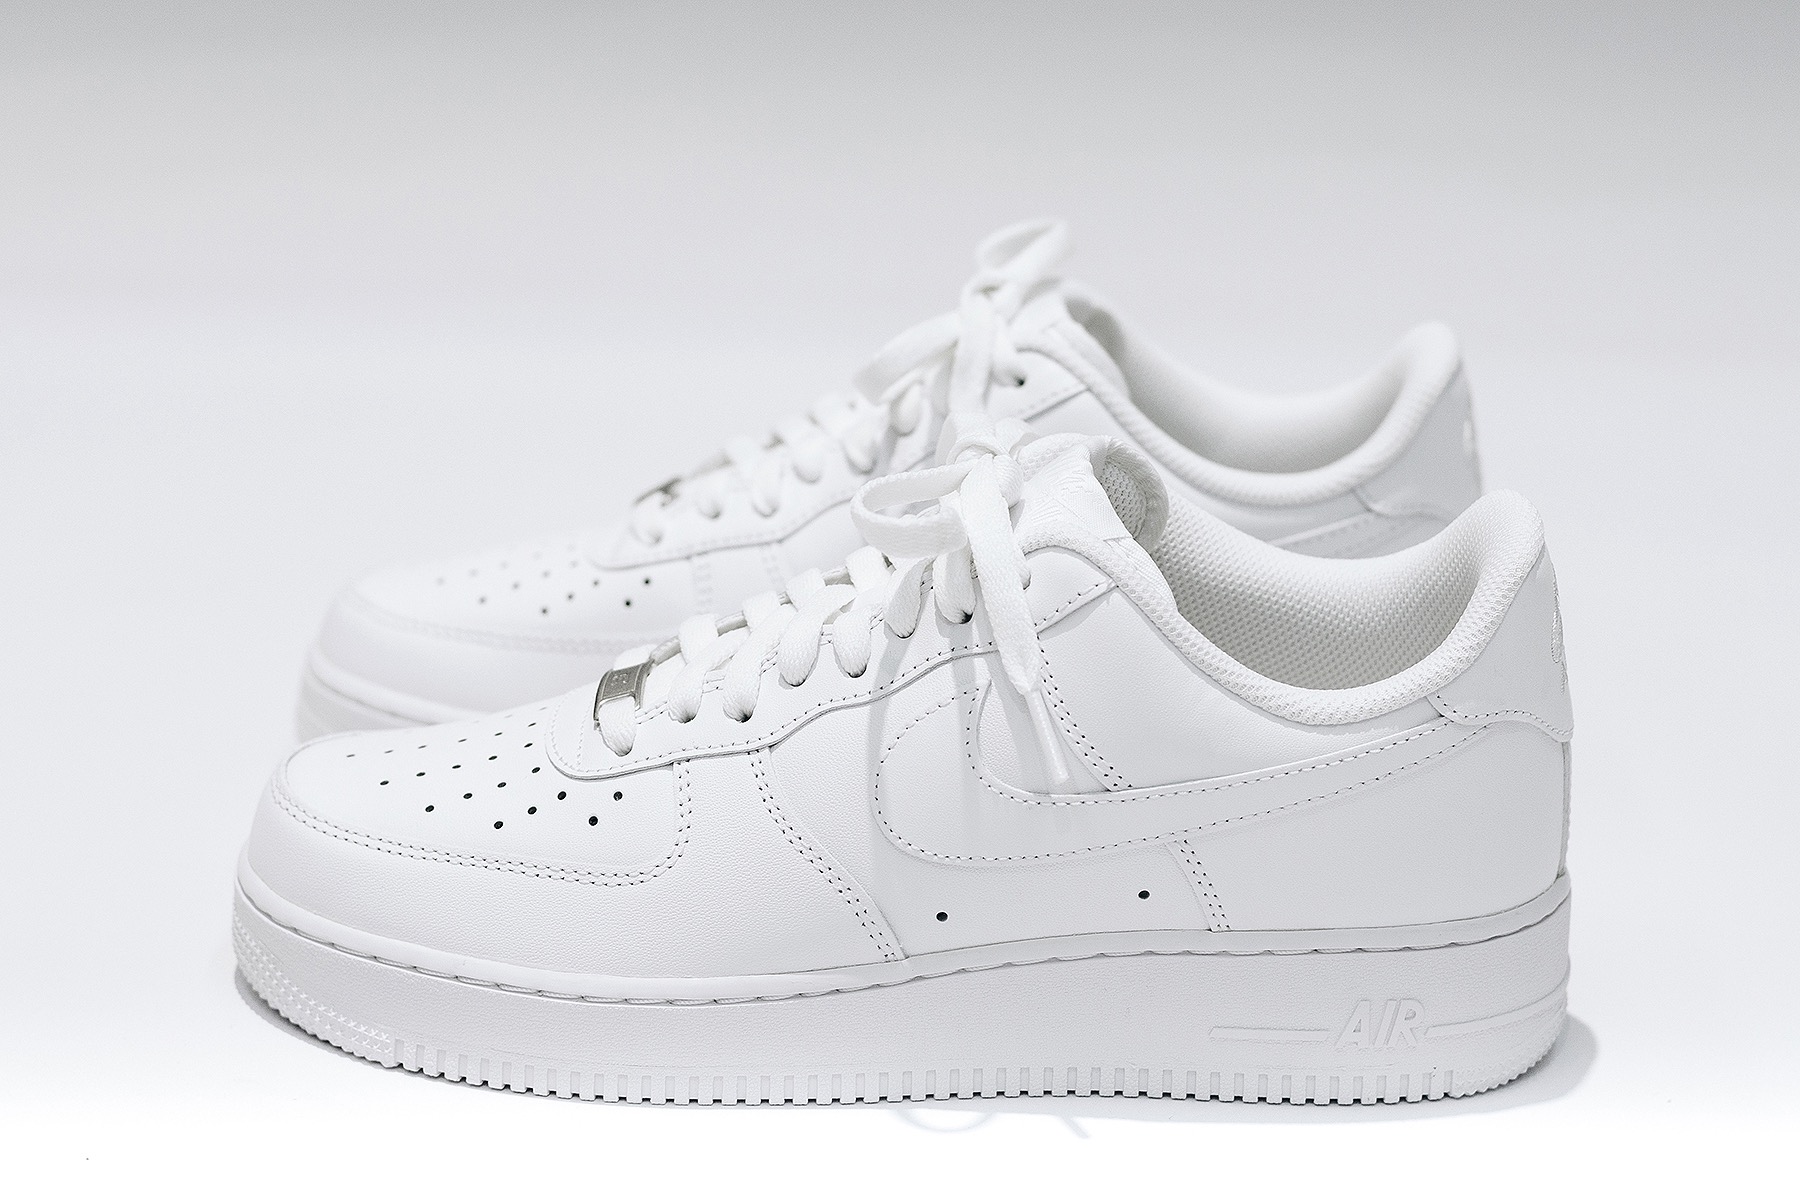 NIKE AIR FORCE 1 '07が2022年からついに値上げ！今後のAIR FORCE 1はどうなっていくのか？ - ESSENCE  ONLINE STORE ブログ